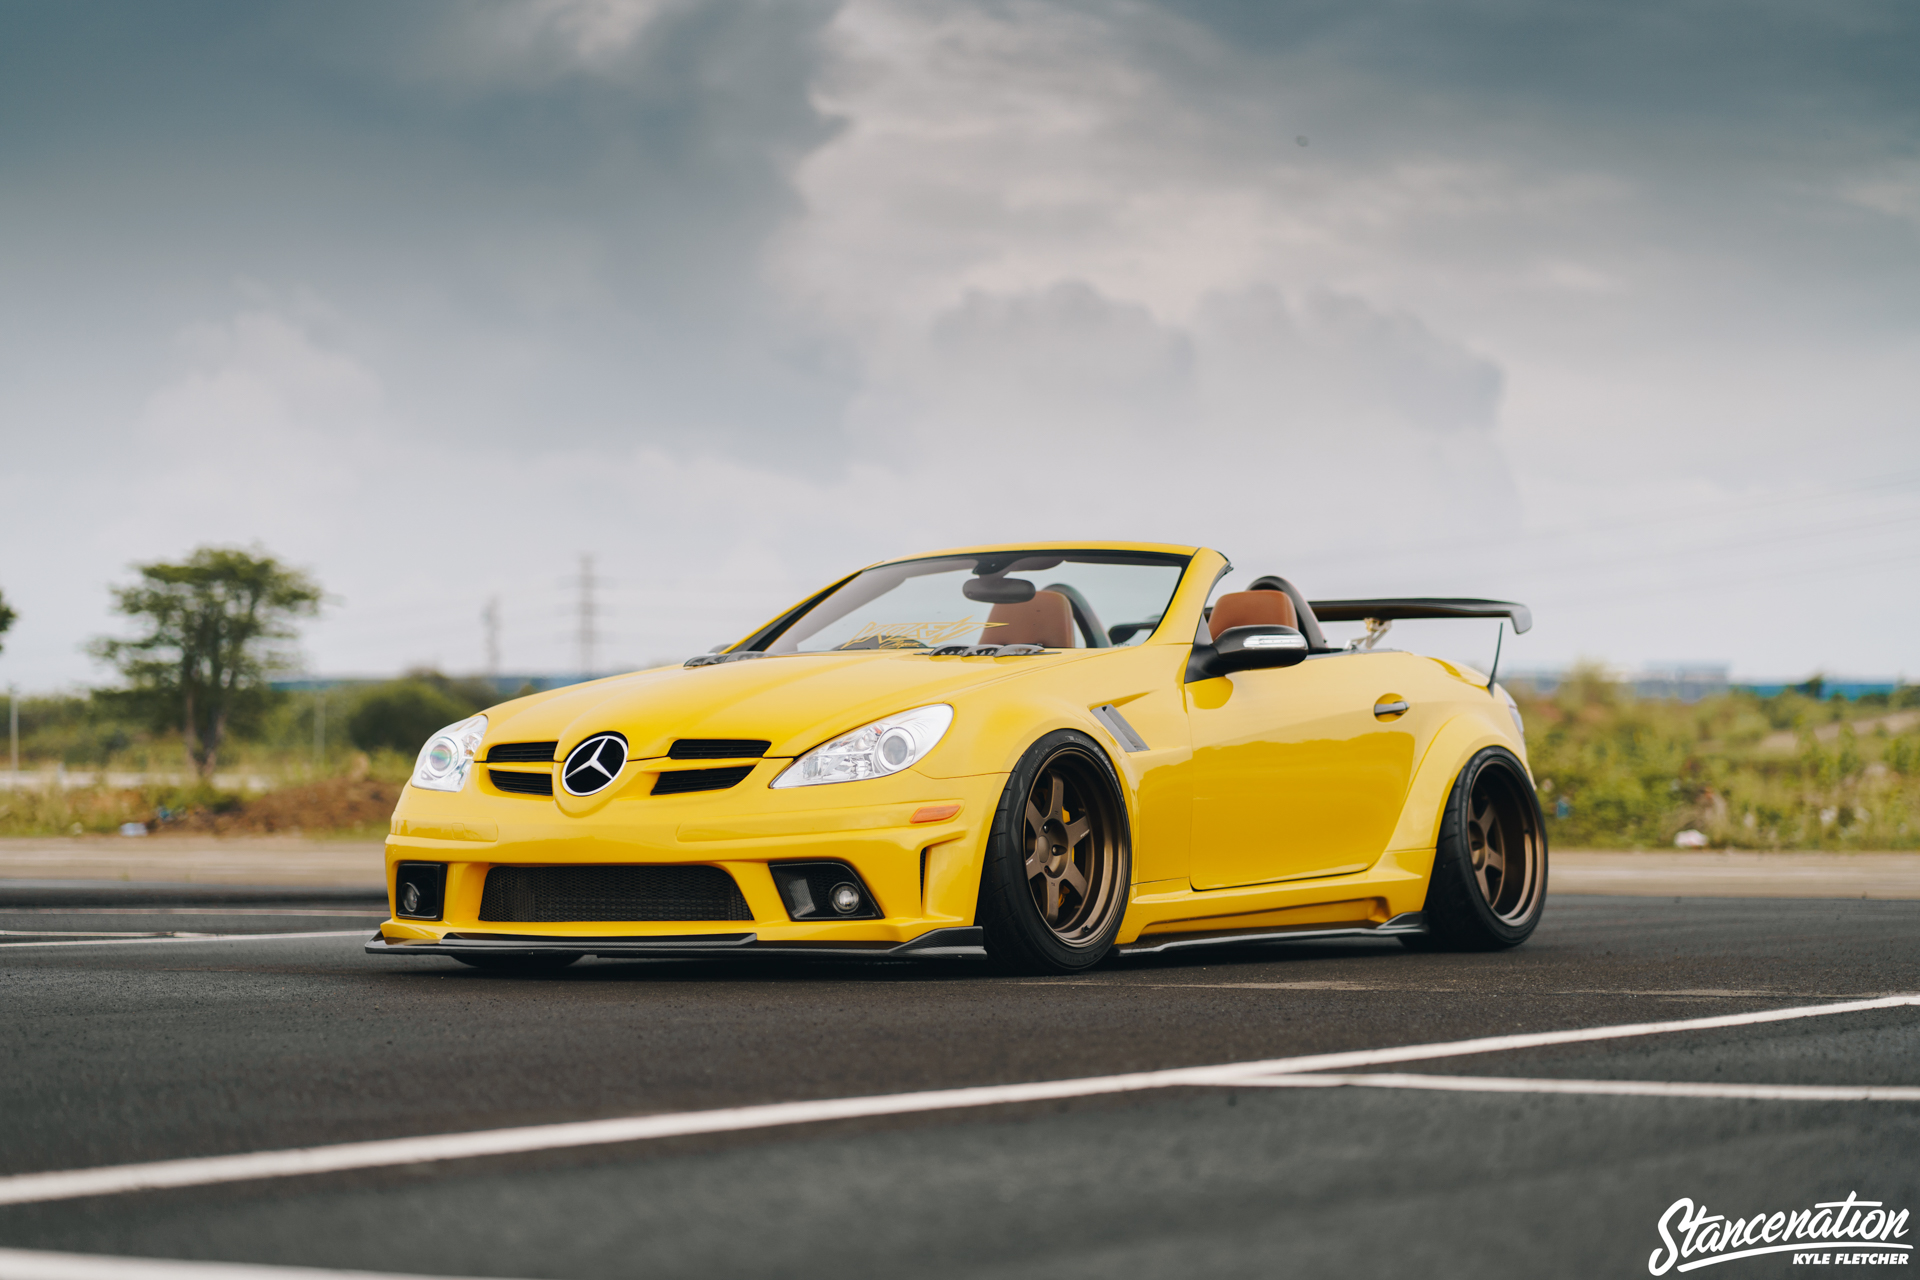 Modified Yellow Mercedes-Benz SLK 200 R171 with Widebody Kit Editorial  Stock Photo - Image of december, jakarta: 273657128